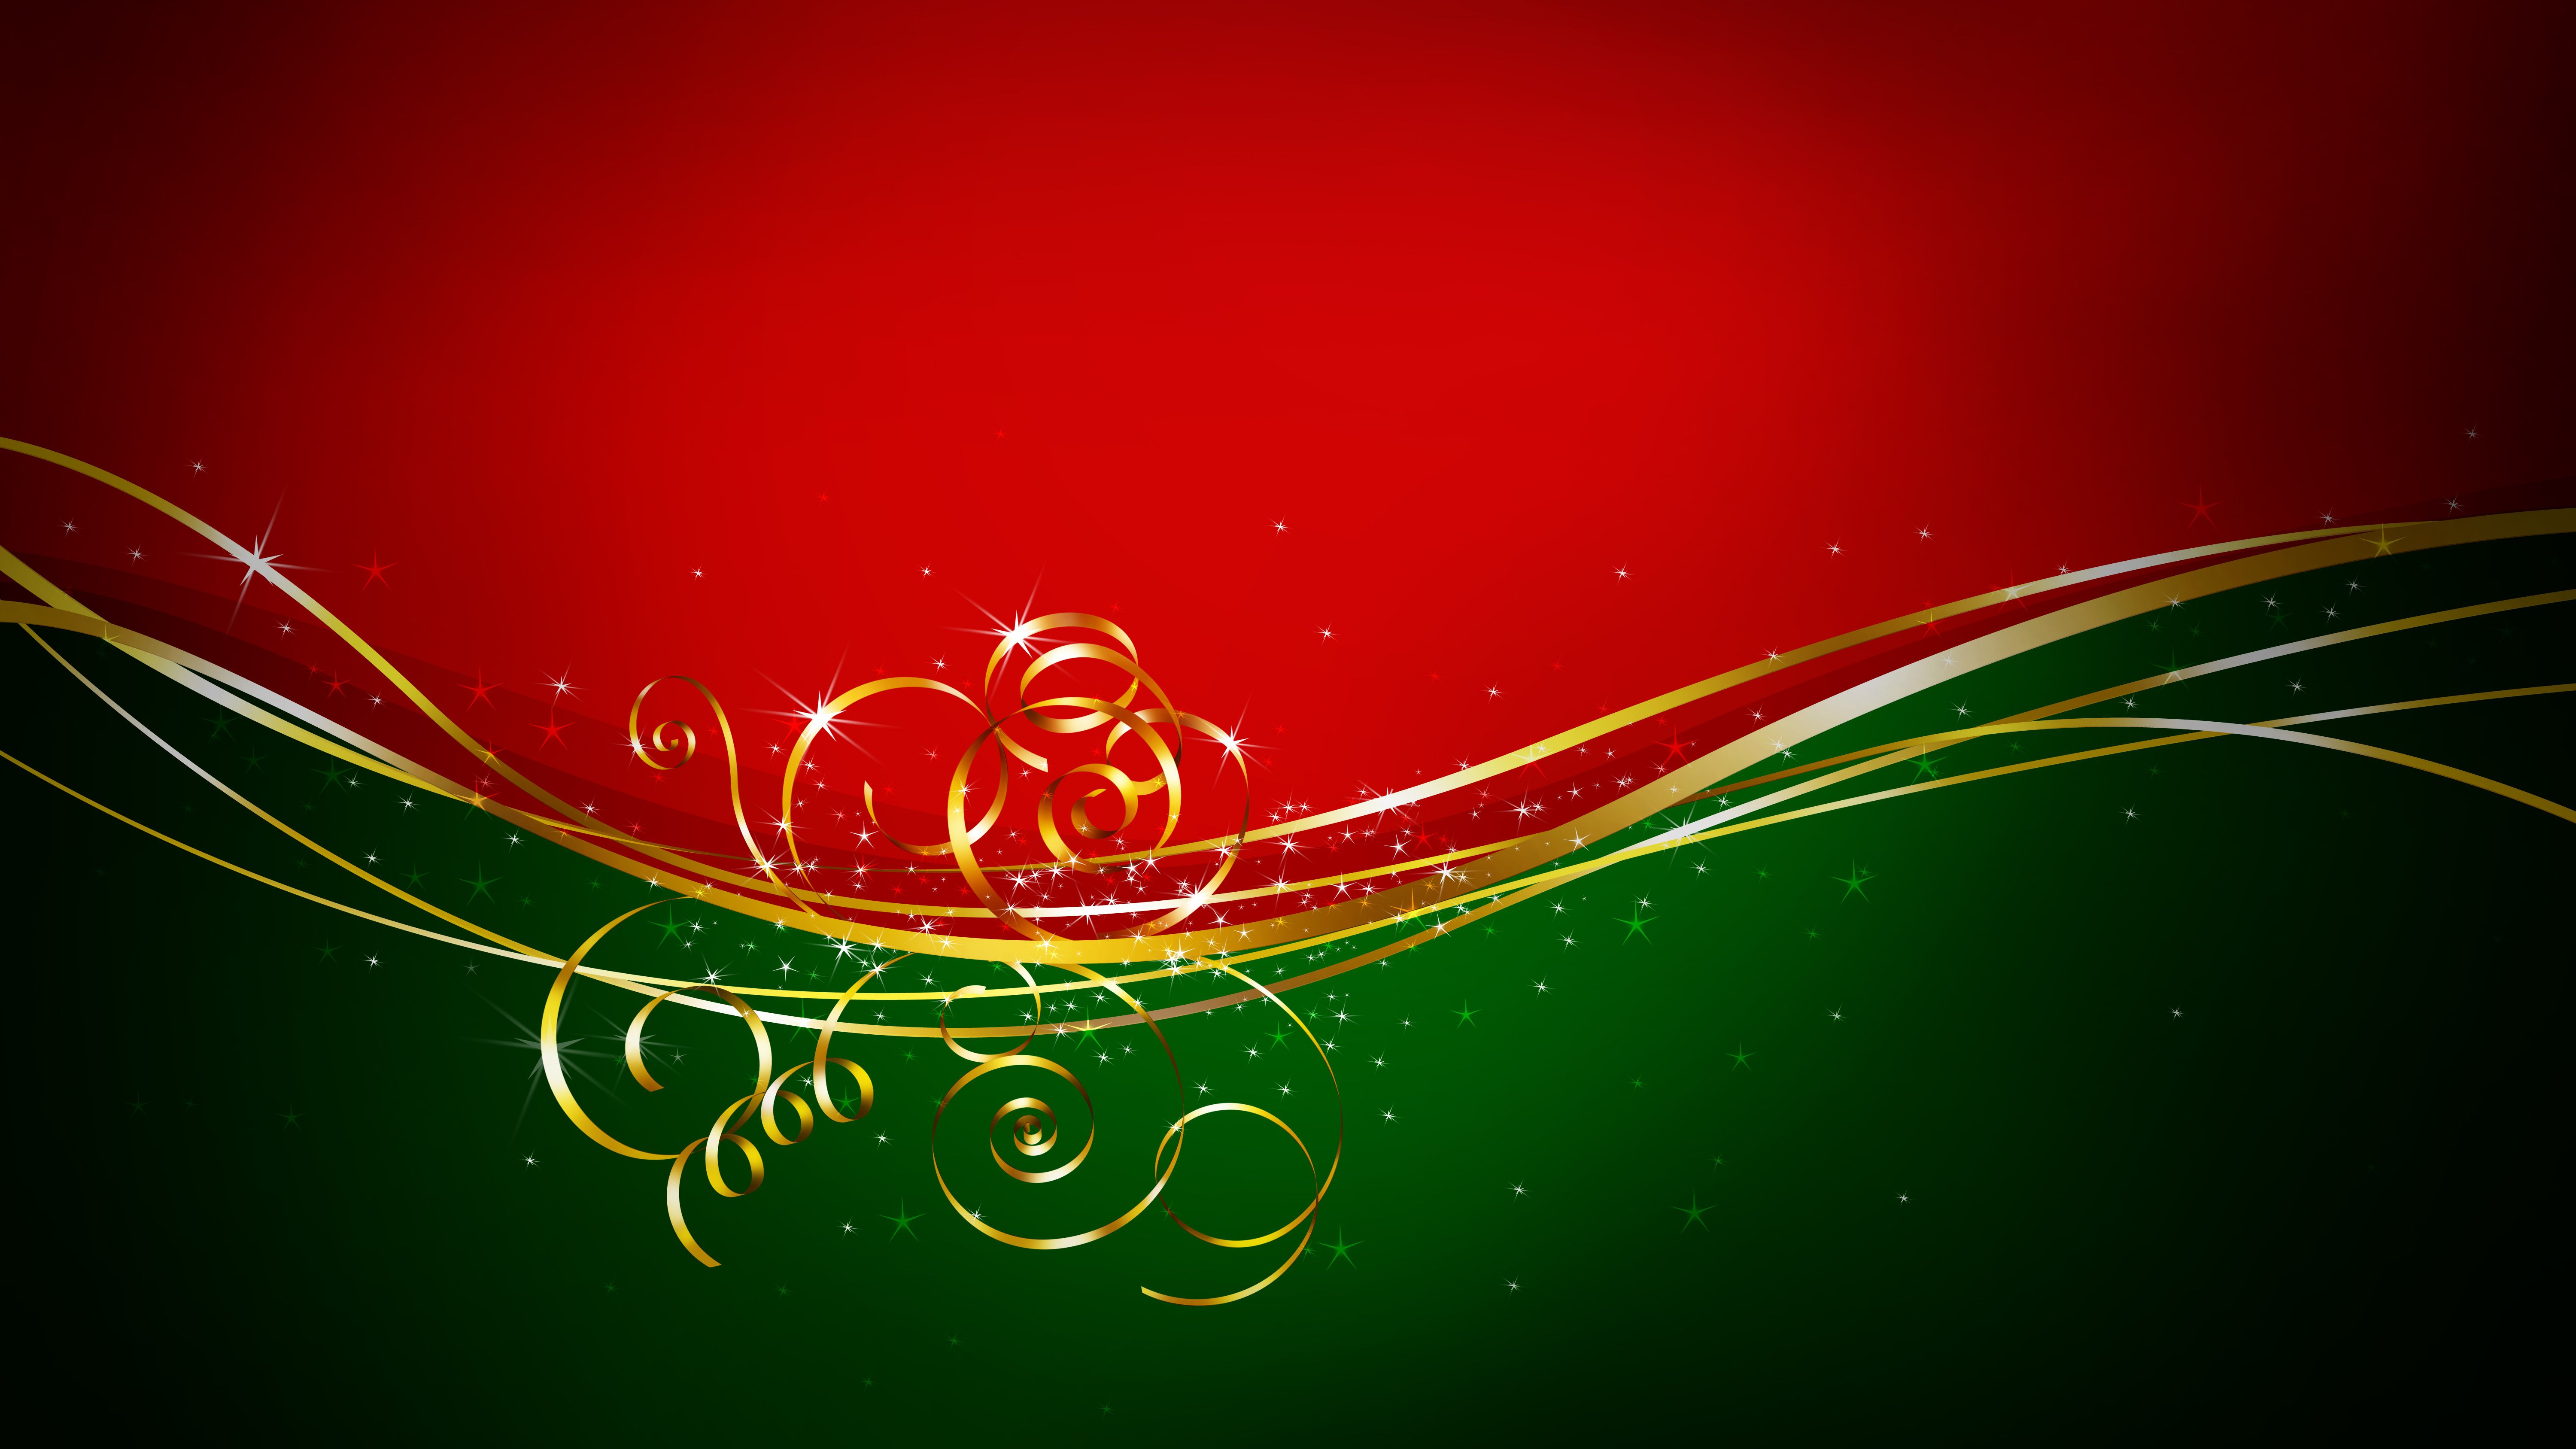 Red And Green Christmas Wallpapers posted by Zoey Simpson